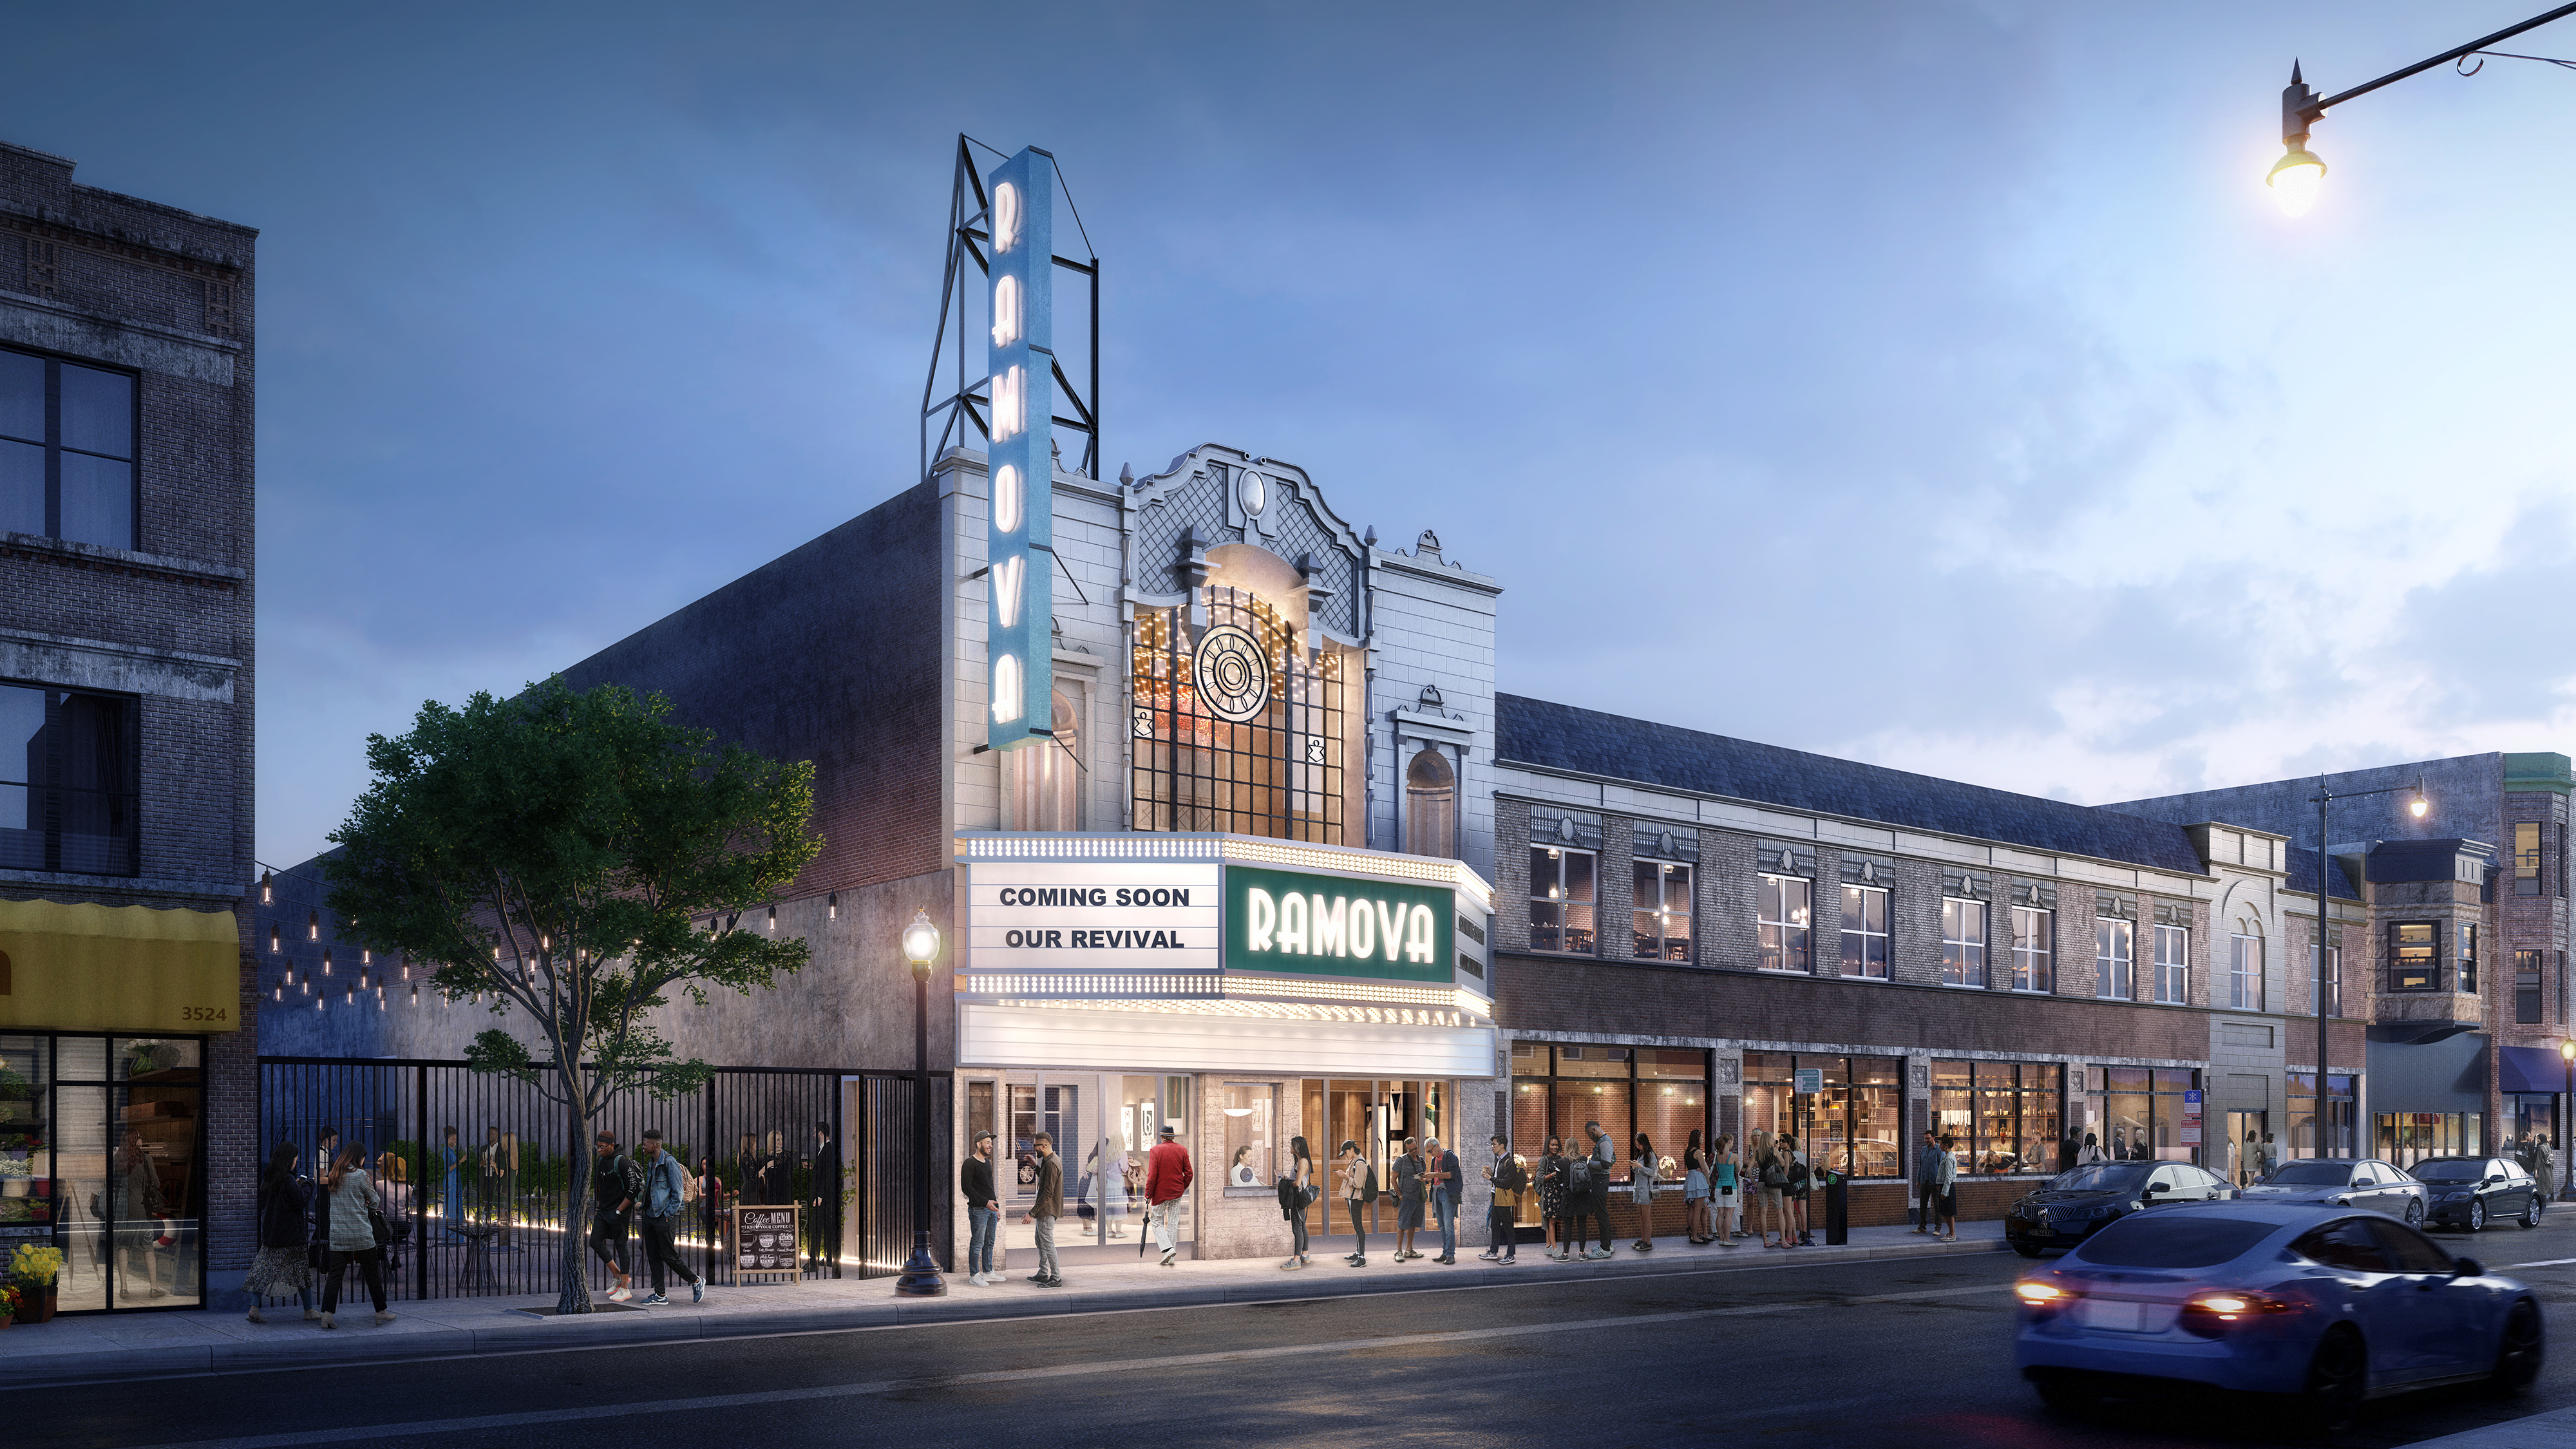 A CGI rendering of the Ramova Theater with a marquee reading “Coming Soon Our Revival.”